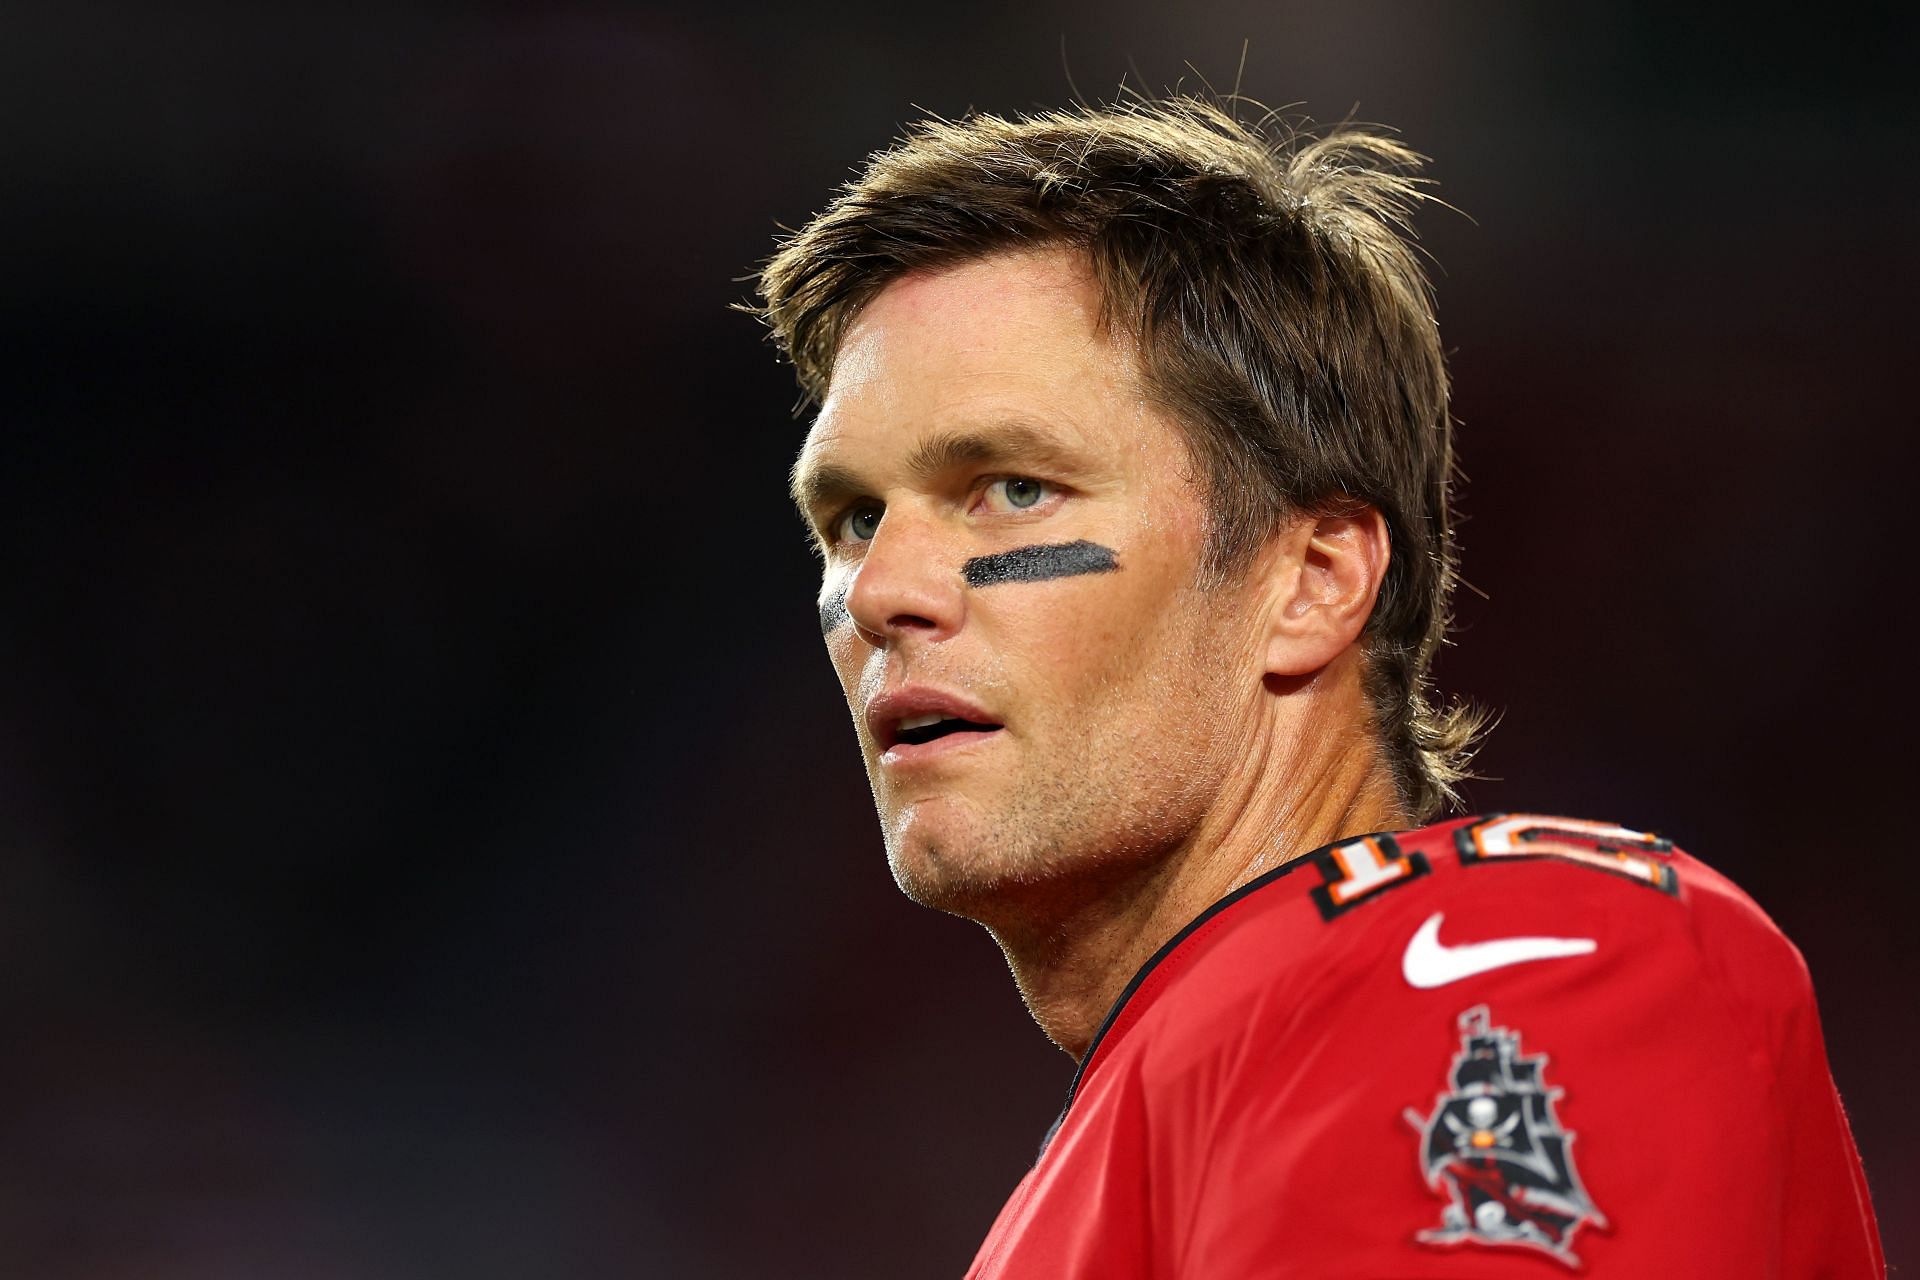 Tom Brady becomes most sacked quarterback in NFL history as Tampa